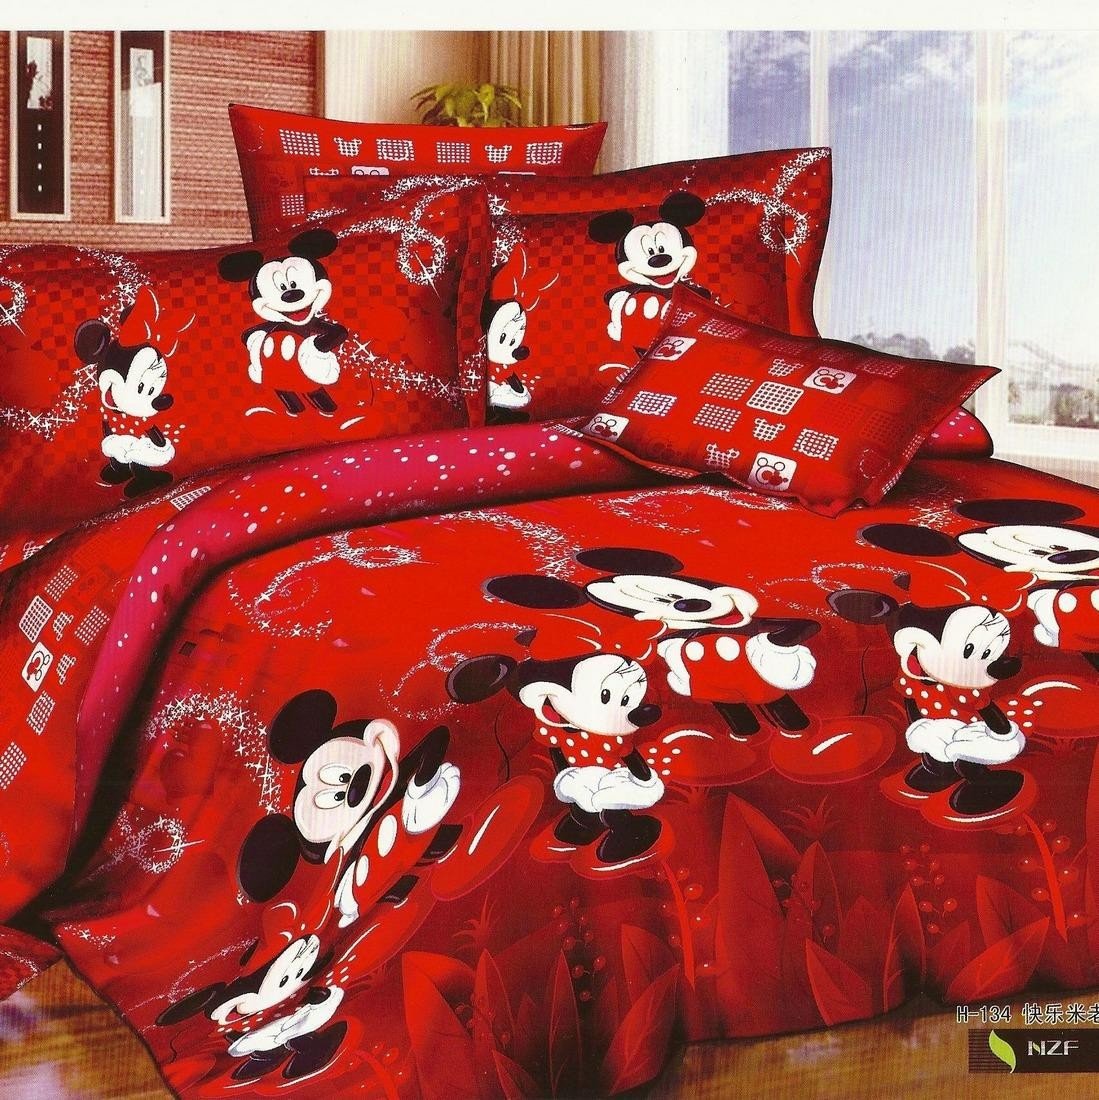 Minnie Mouse Twin Bedroom Set Best Of Red Mickey and Minnie Mouse Bedding Sets for Christmas